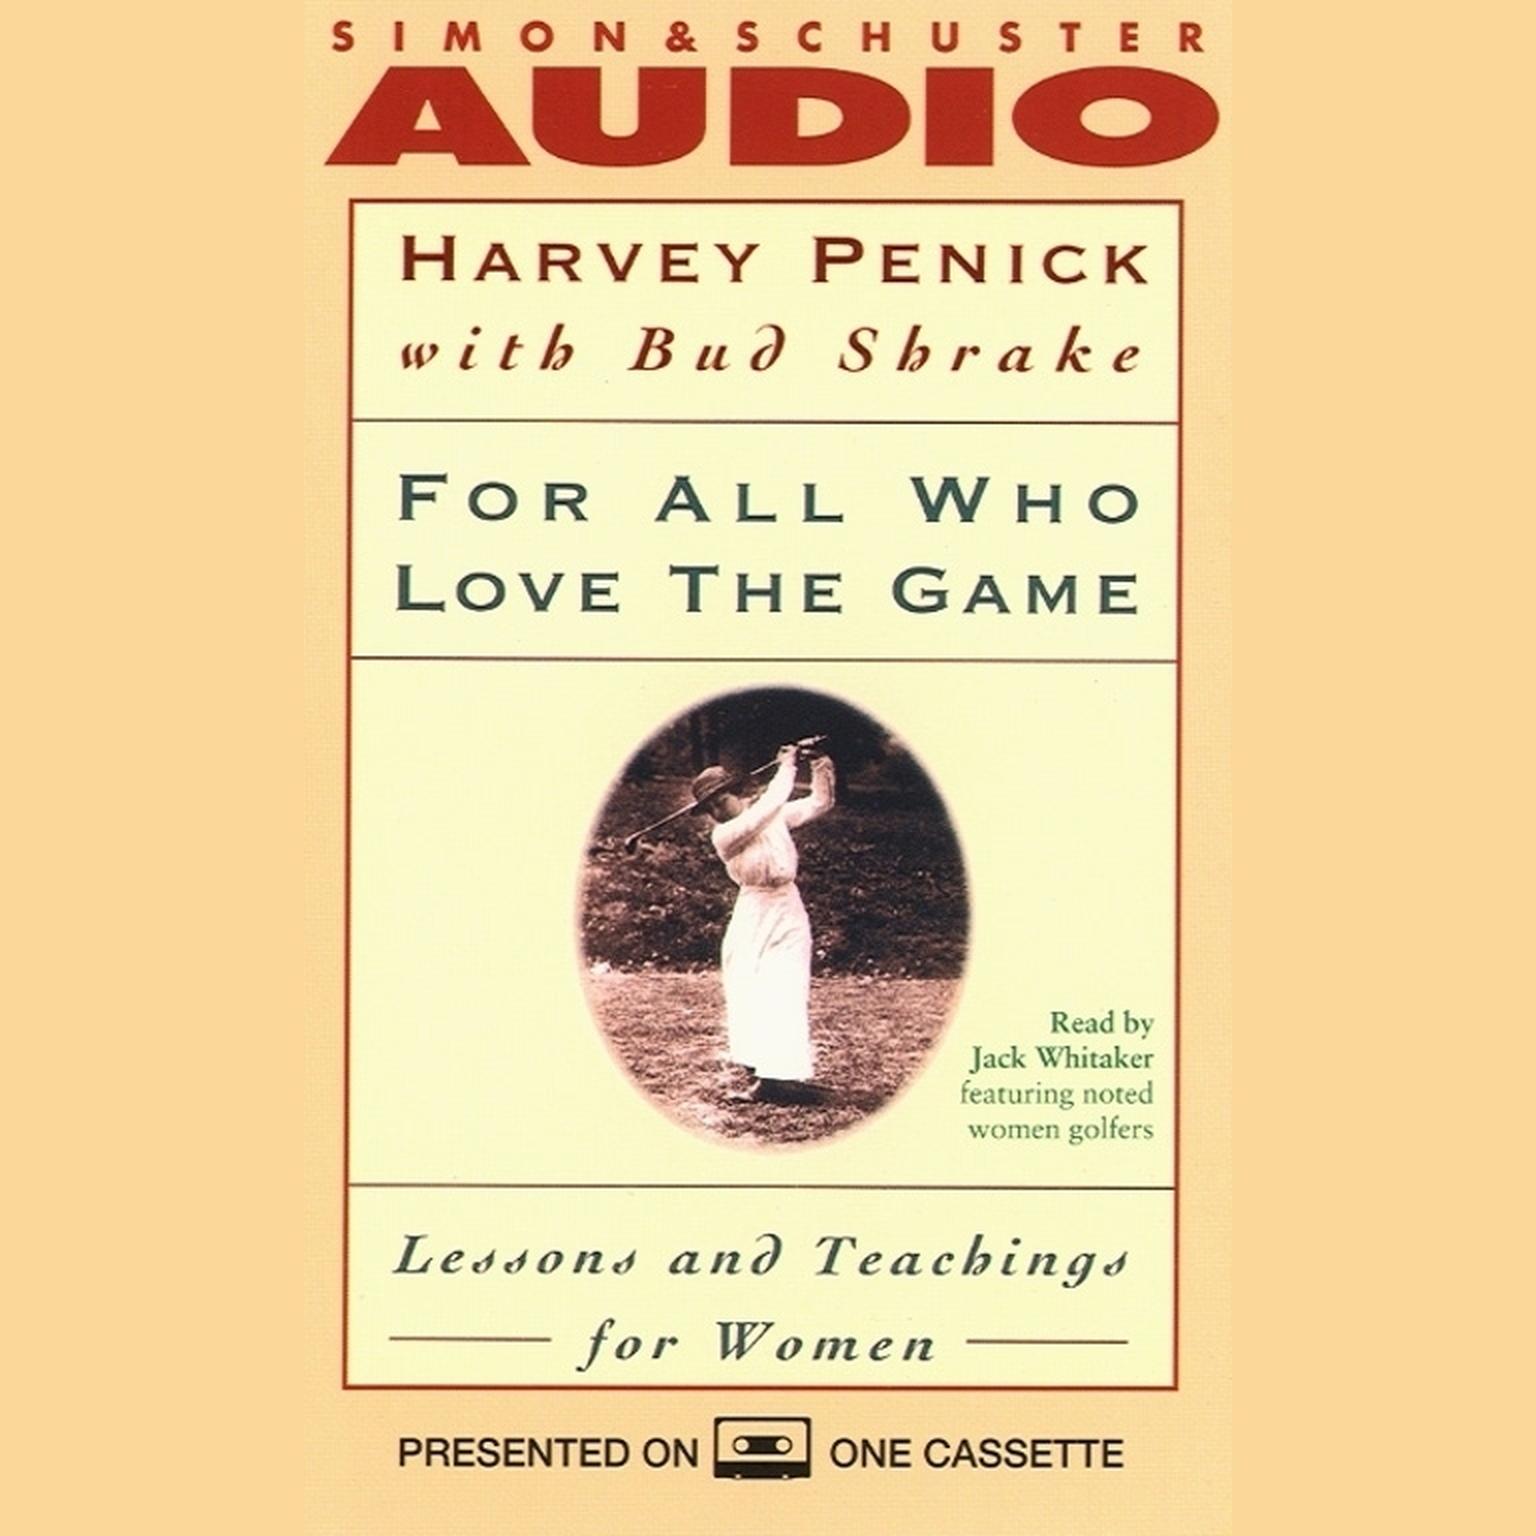 For All Who Love the Game (Abridged): Lessons and Teachings for Women Audiobook, by Harvey Penick